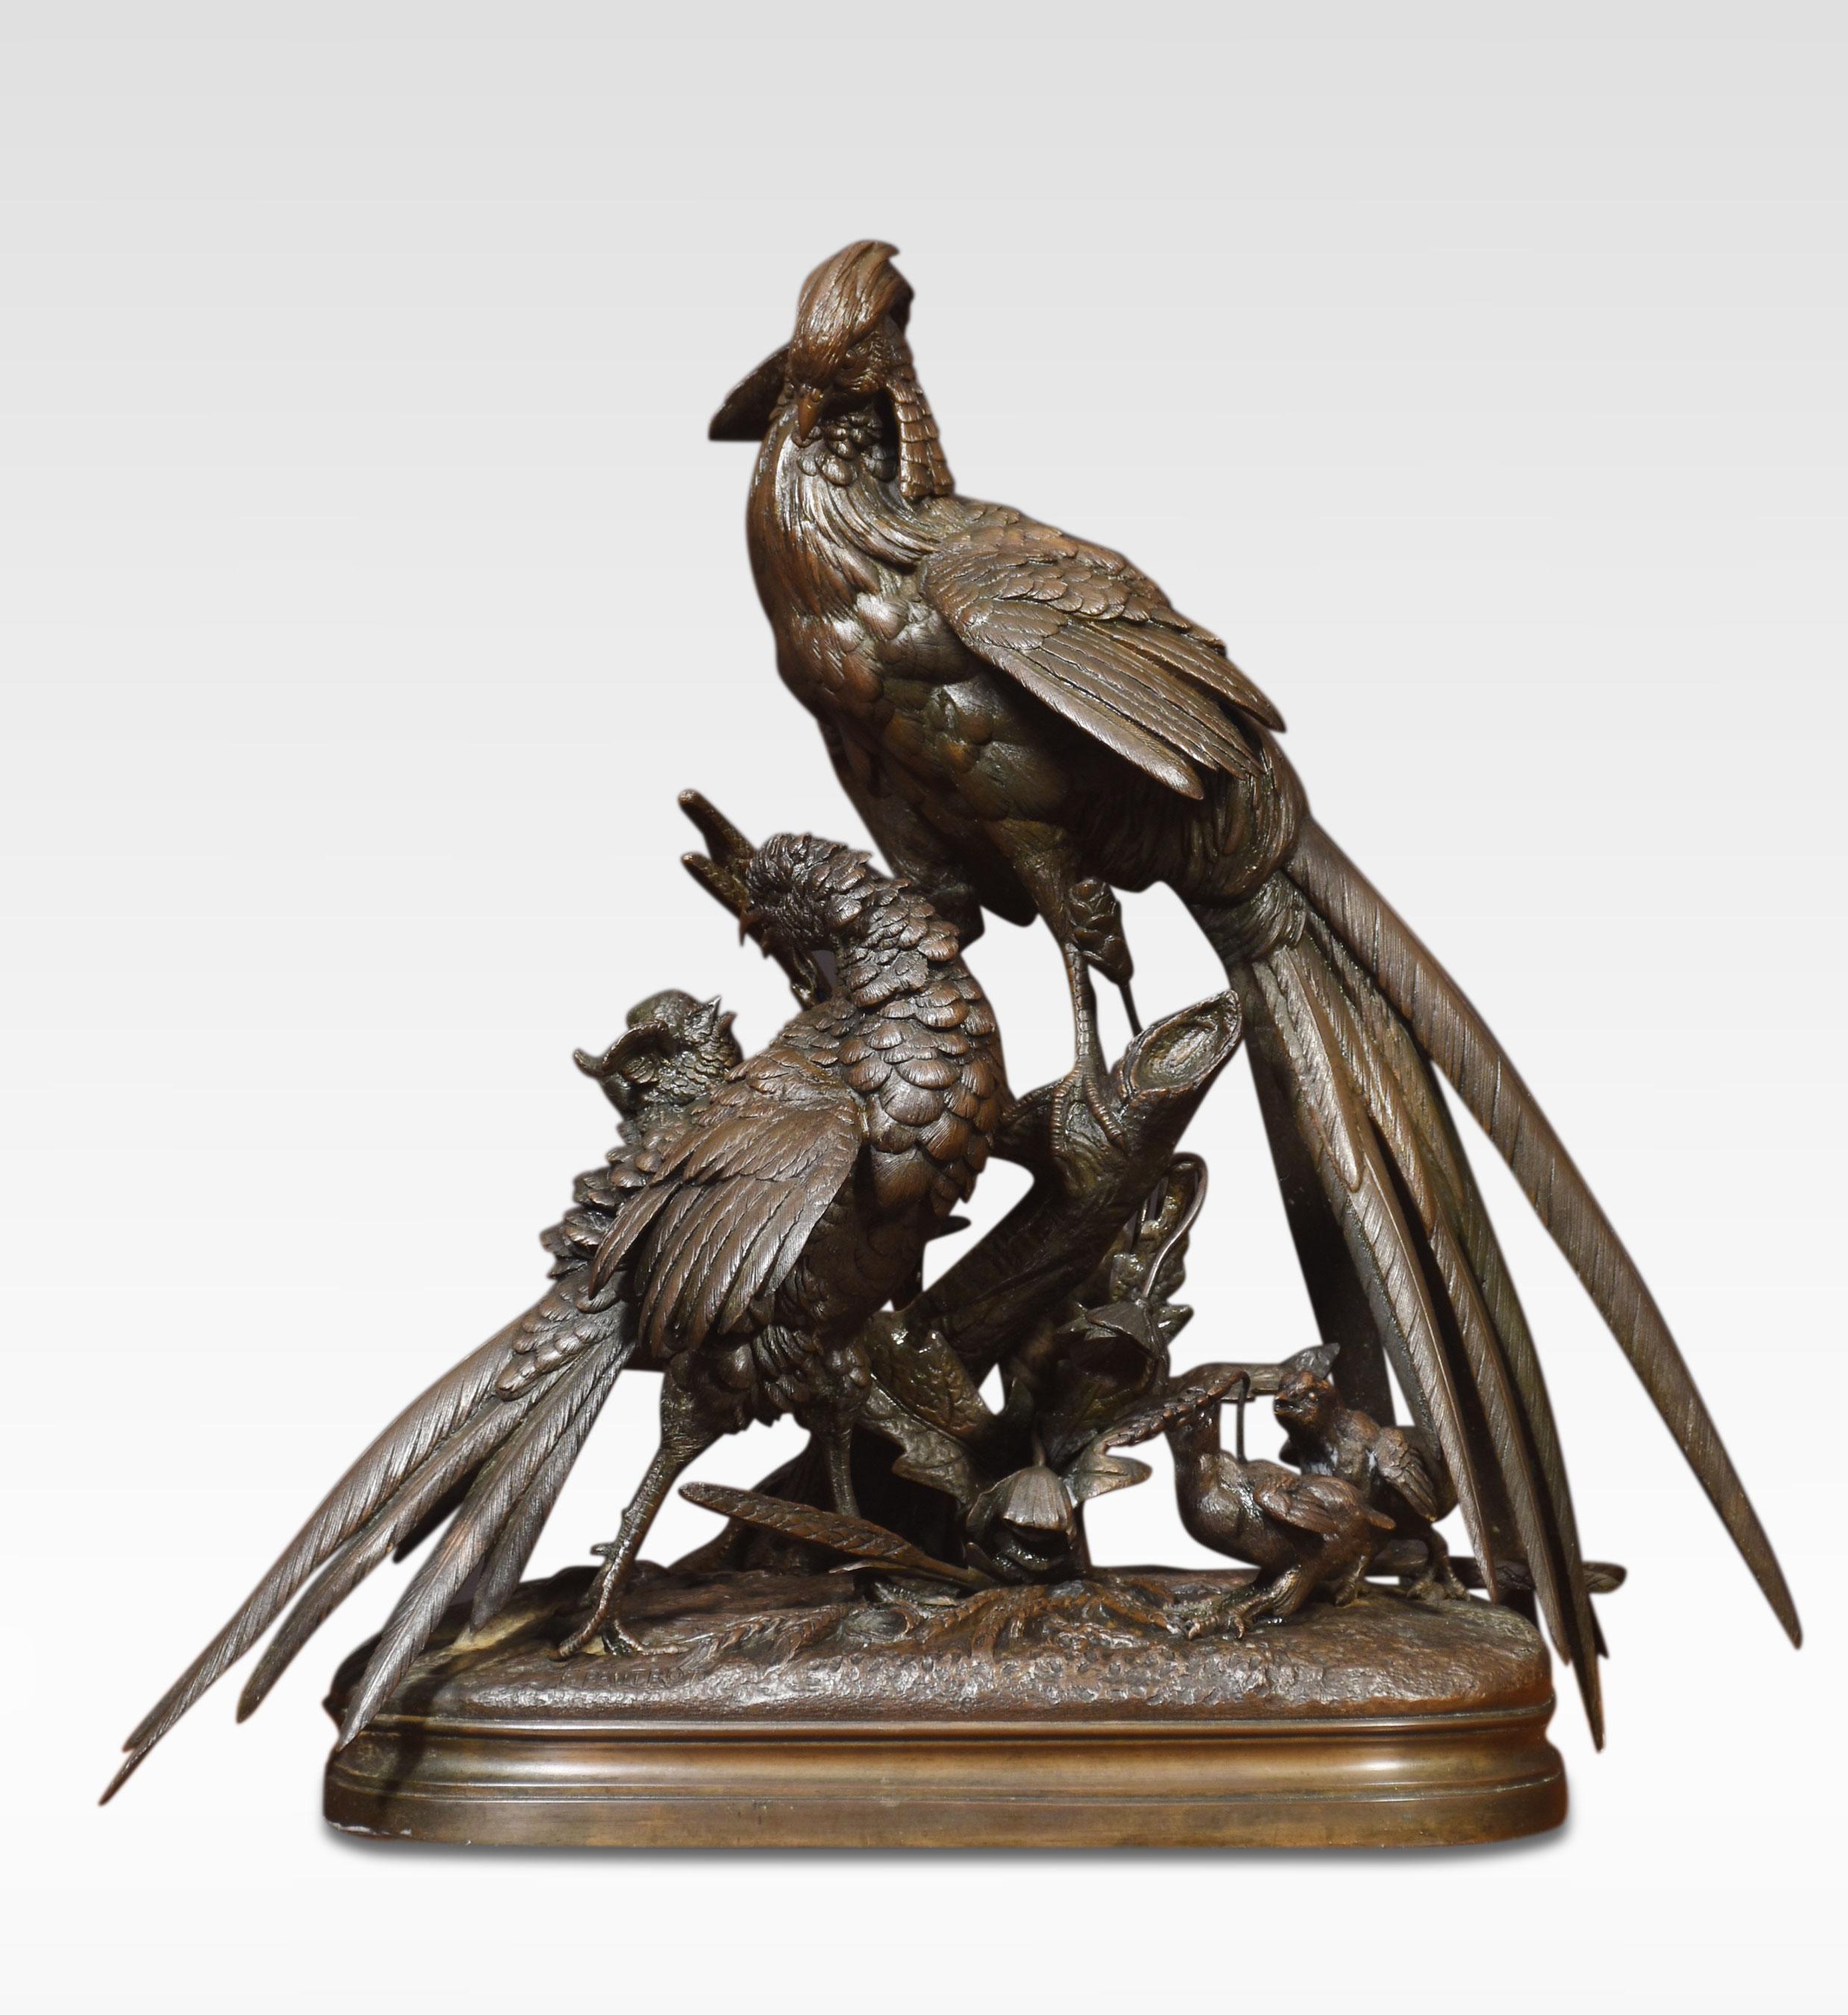 After a model by Ferdinand Pautrot bronze sculpture of a Pheasants, on oval base signed F. Pautrot.
Dimensions
Height 13.5 inches
Width 15 inches
Depth 7 inches.